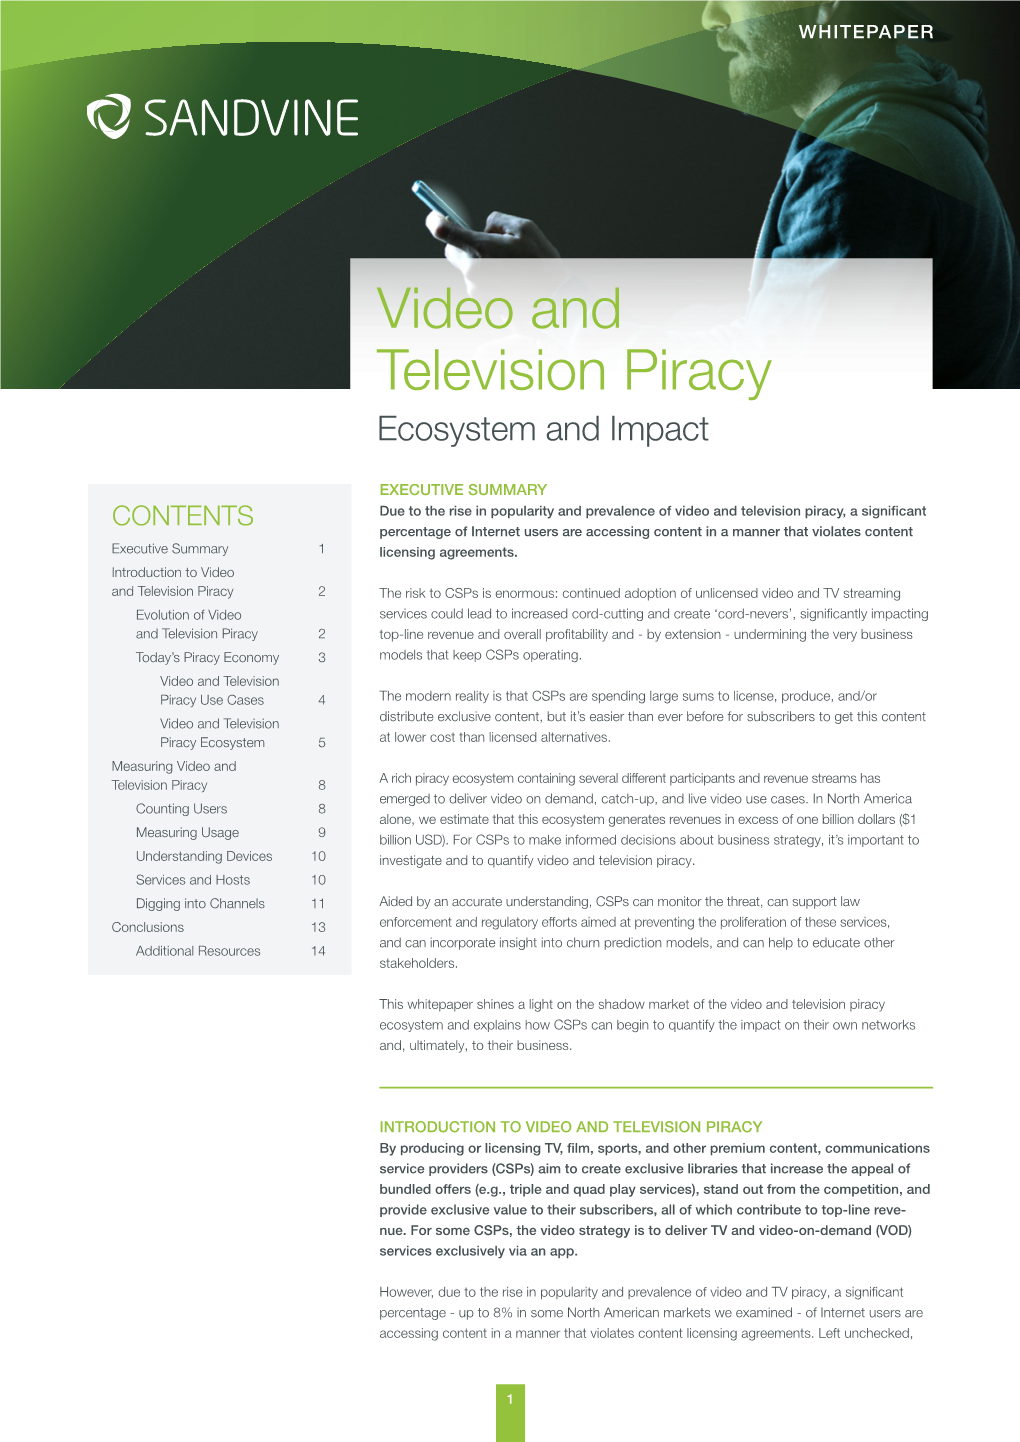 Video and Television Piracy: Ecosystem and Impact